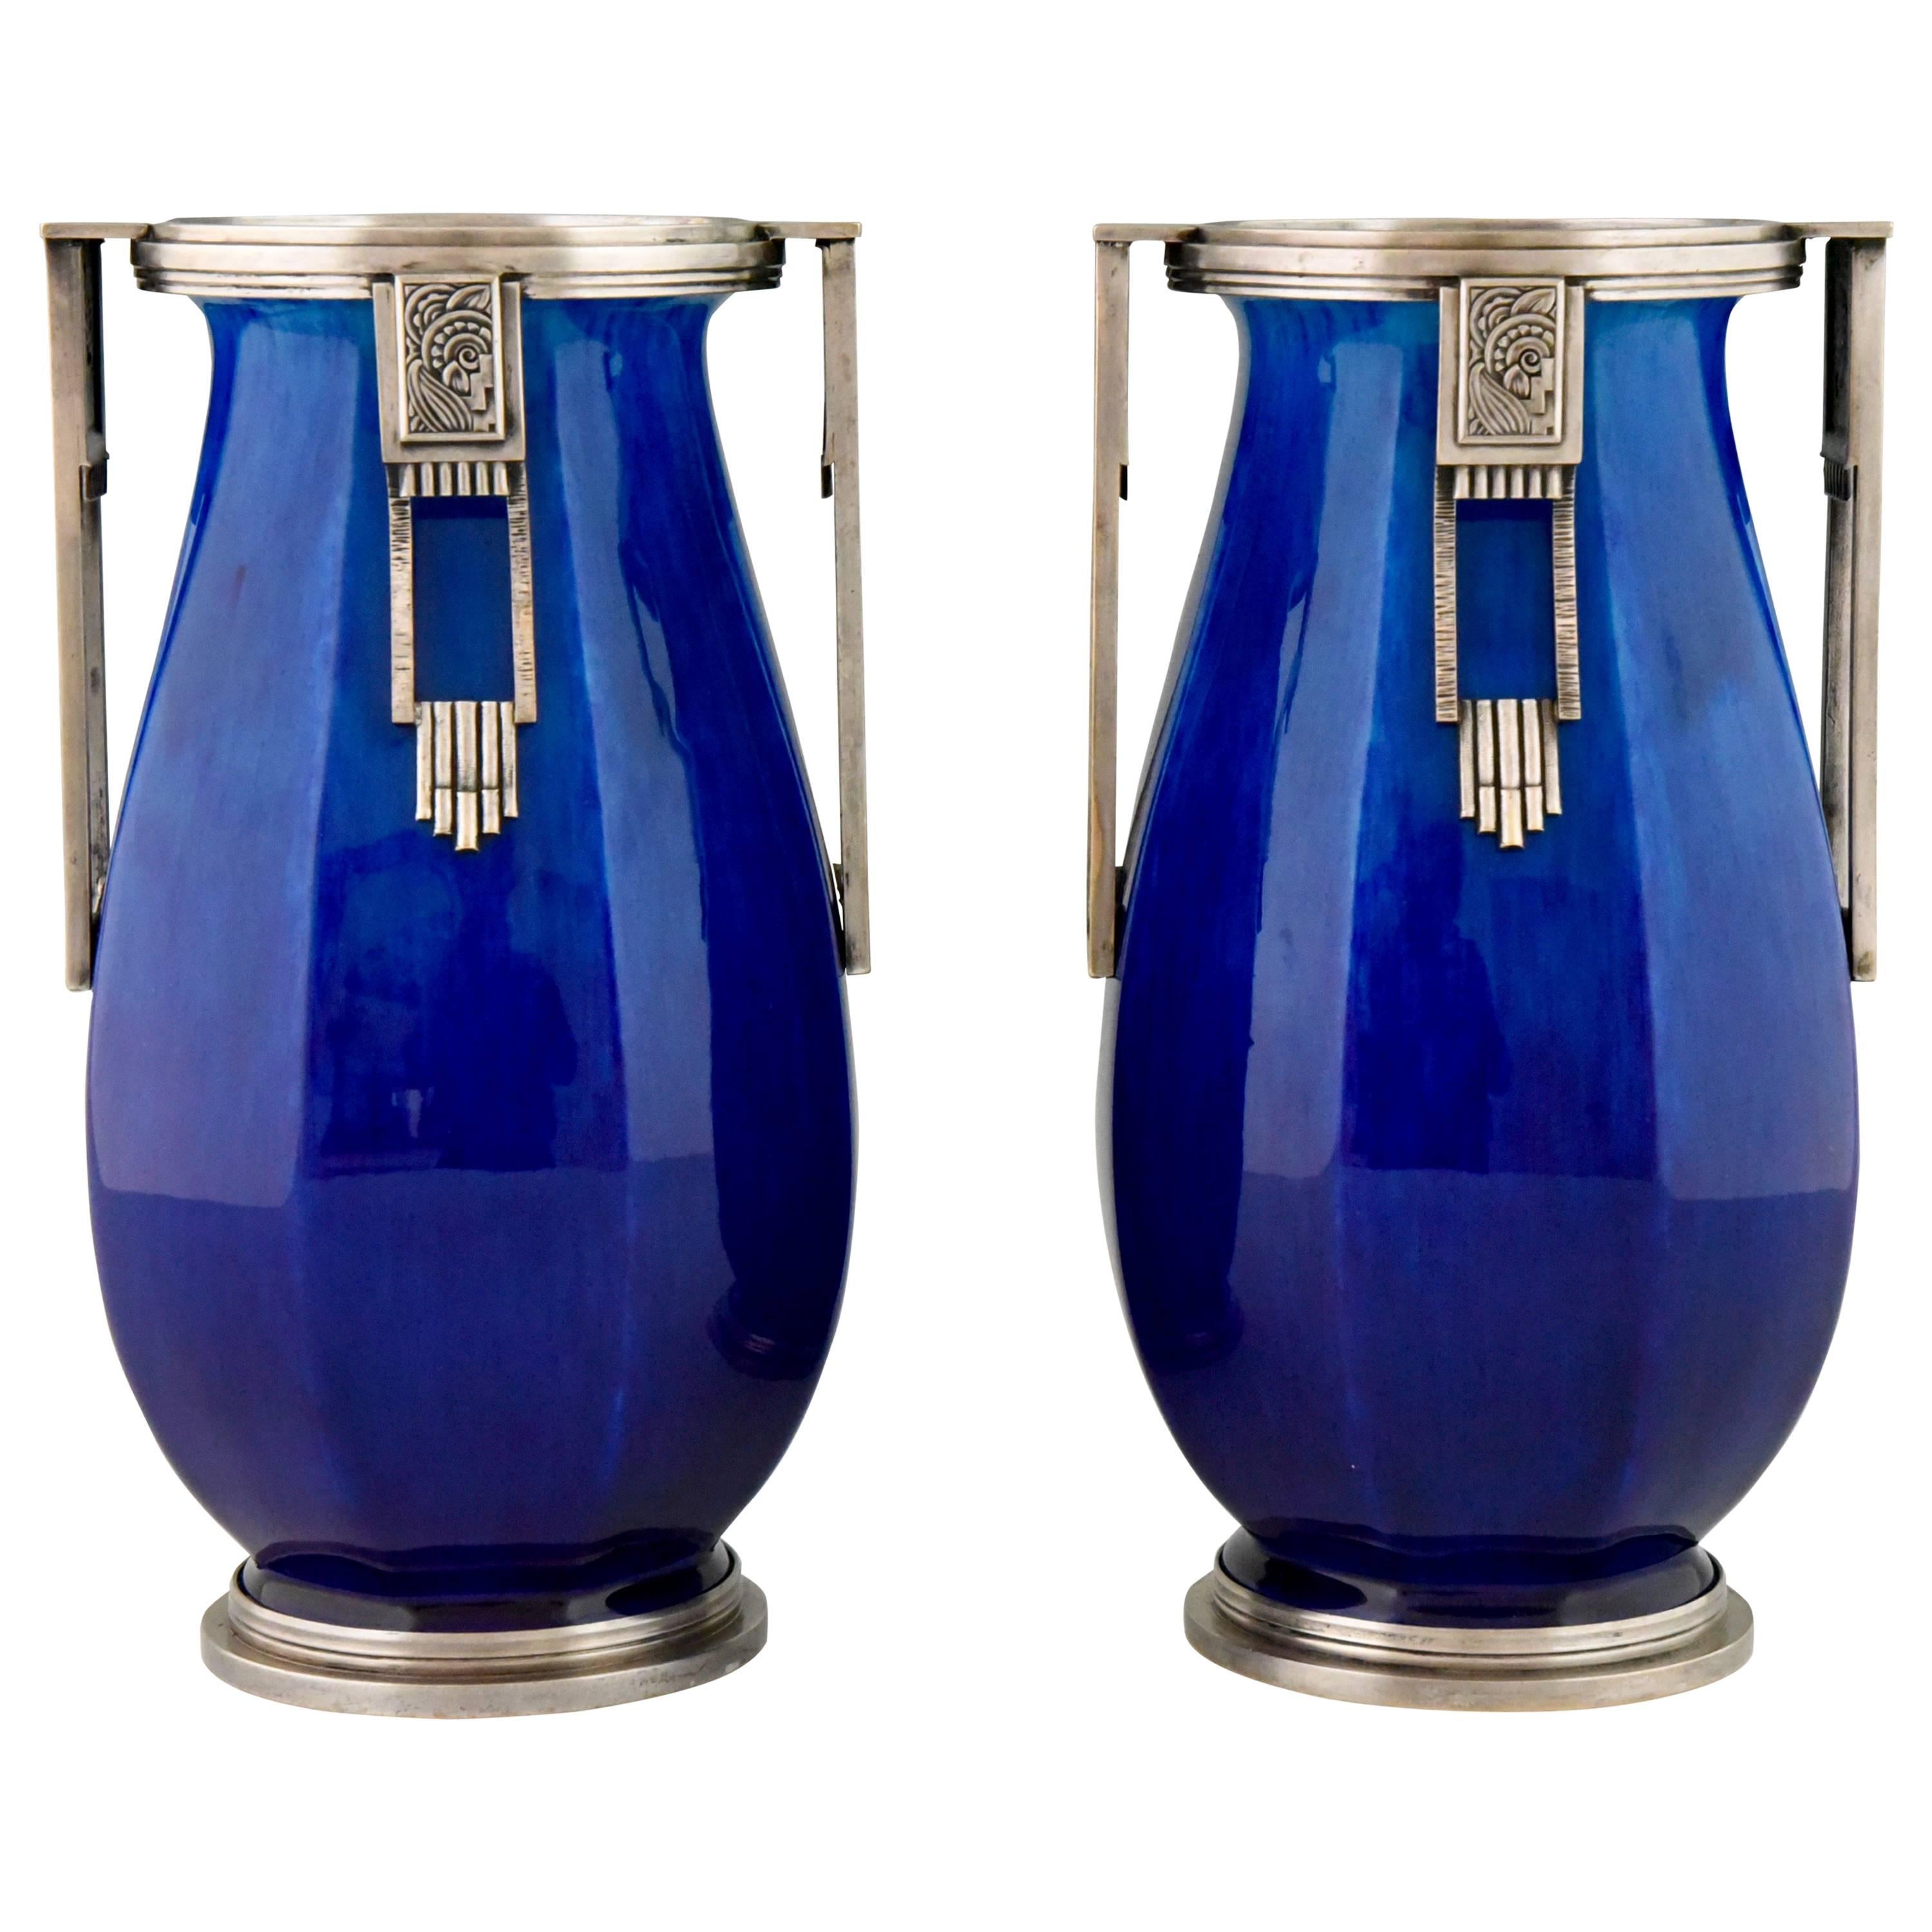 French Art Deco Ceramic and Silvered Bronze Vases by Paul Milet for Sevres, 1925